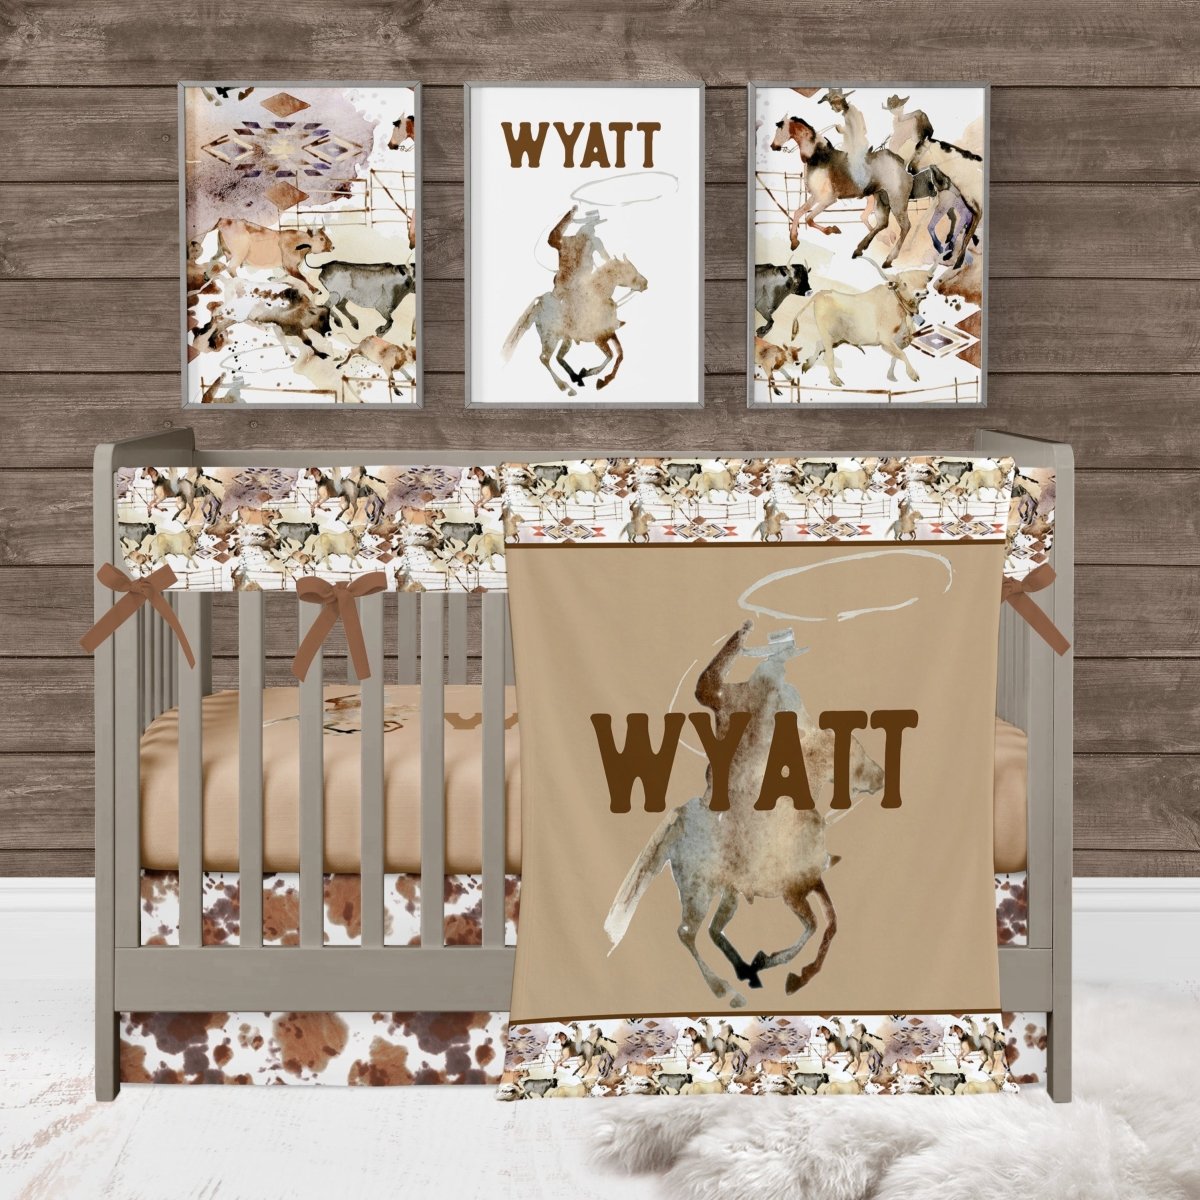 Wild West Cowboy Personalized Crib Sheet - gender_boy, Personalized_Yes, text